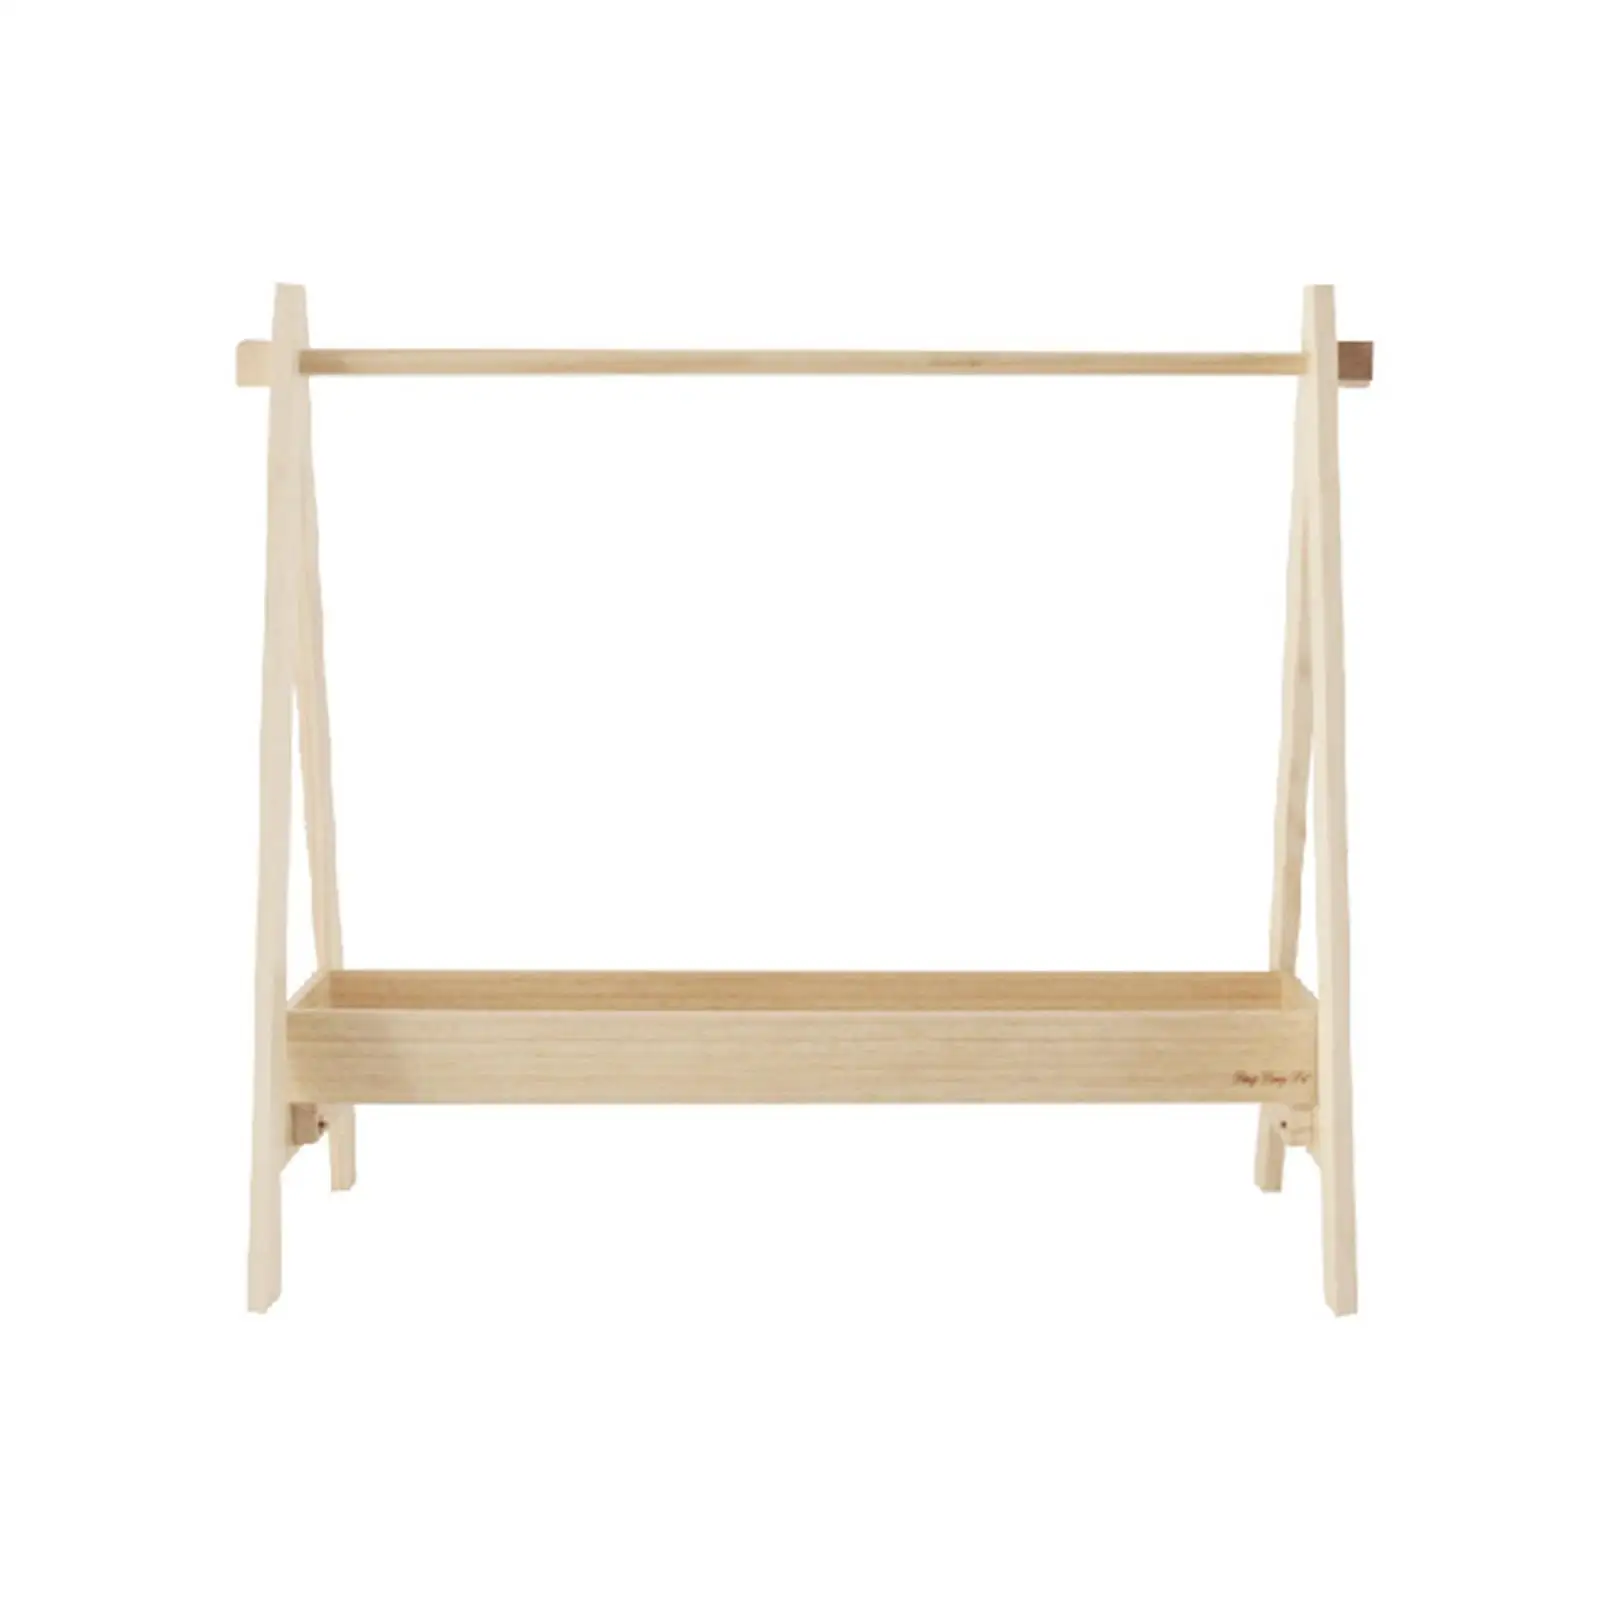 Pet Clothes Rack Clothing Hanger Wooden Stable Laundry Shelf Display Stand Storage Organizer Cat Wardrobe for Living Room Cats